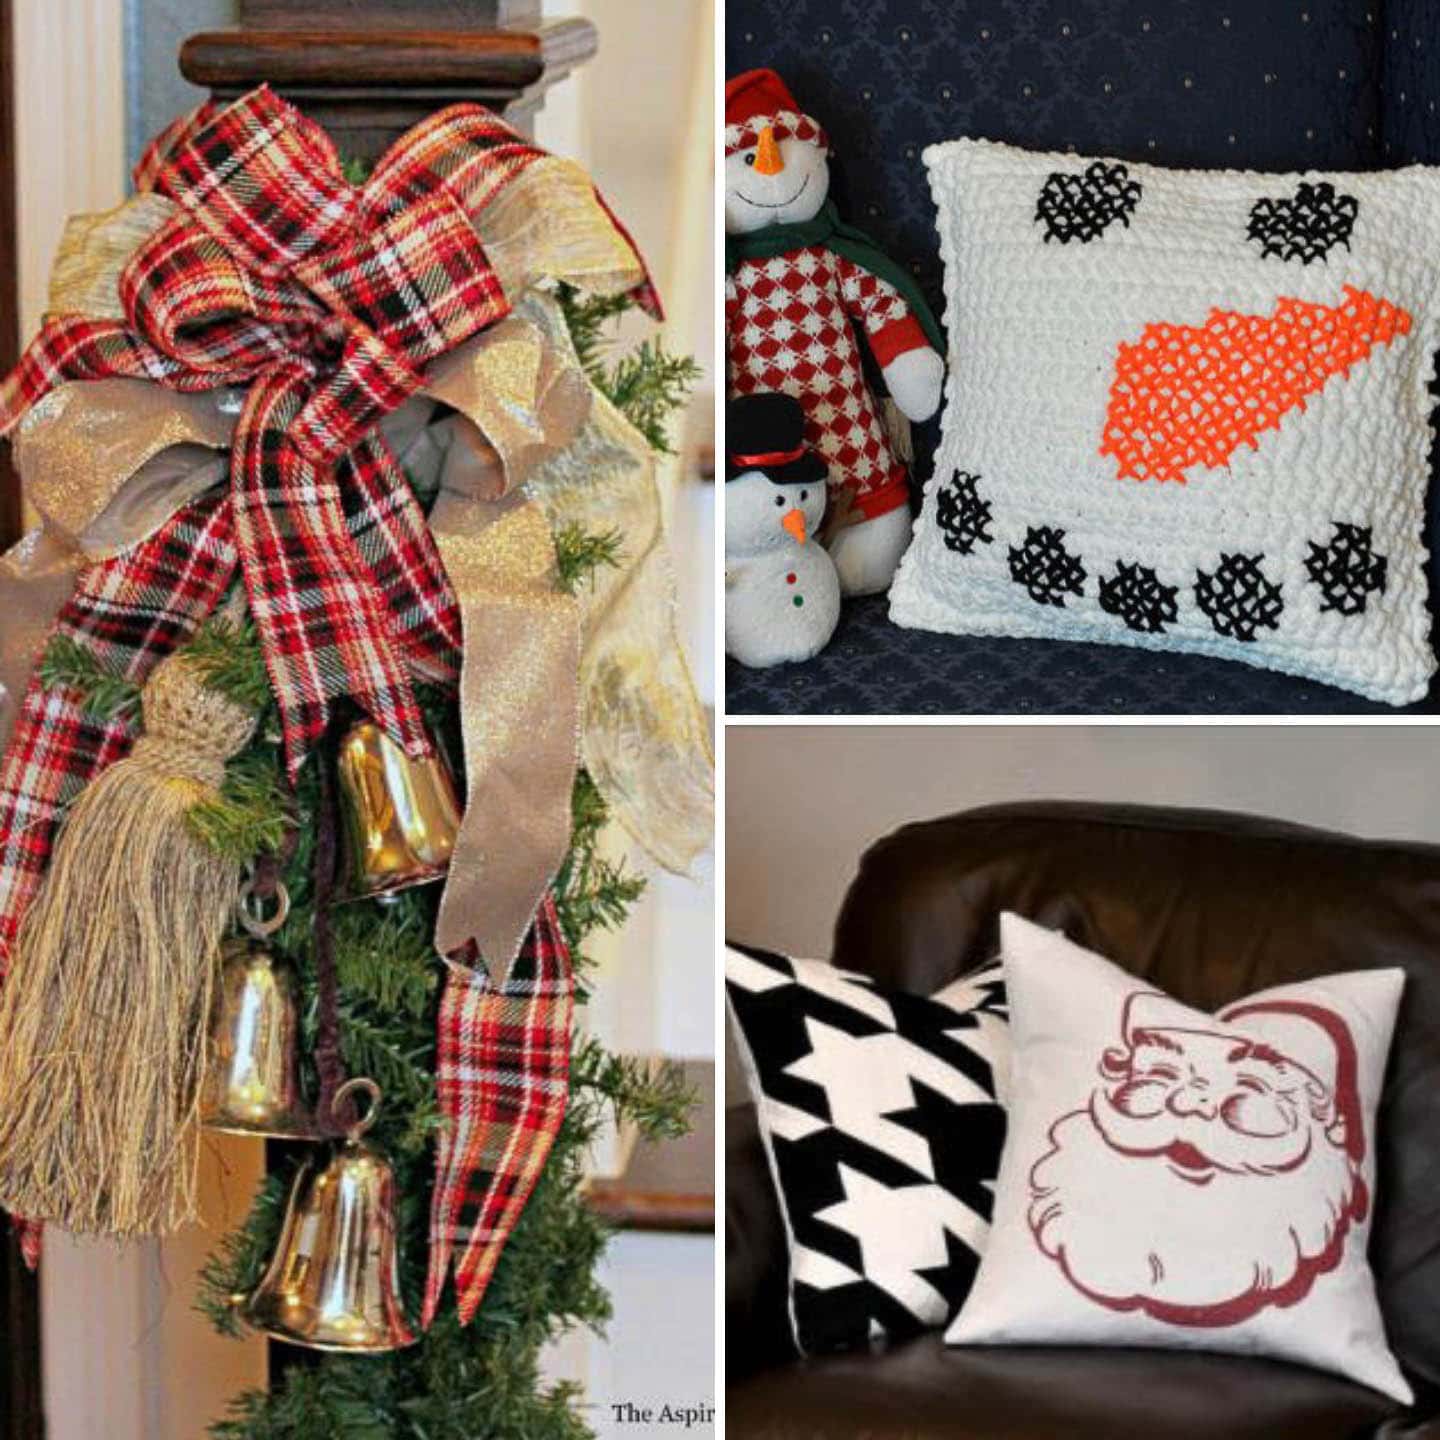 Christmas bow, crochet and cross stitch snowman pillow and DIY spray painted Christmas pillows